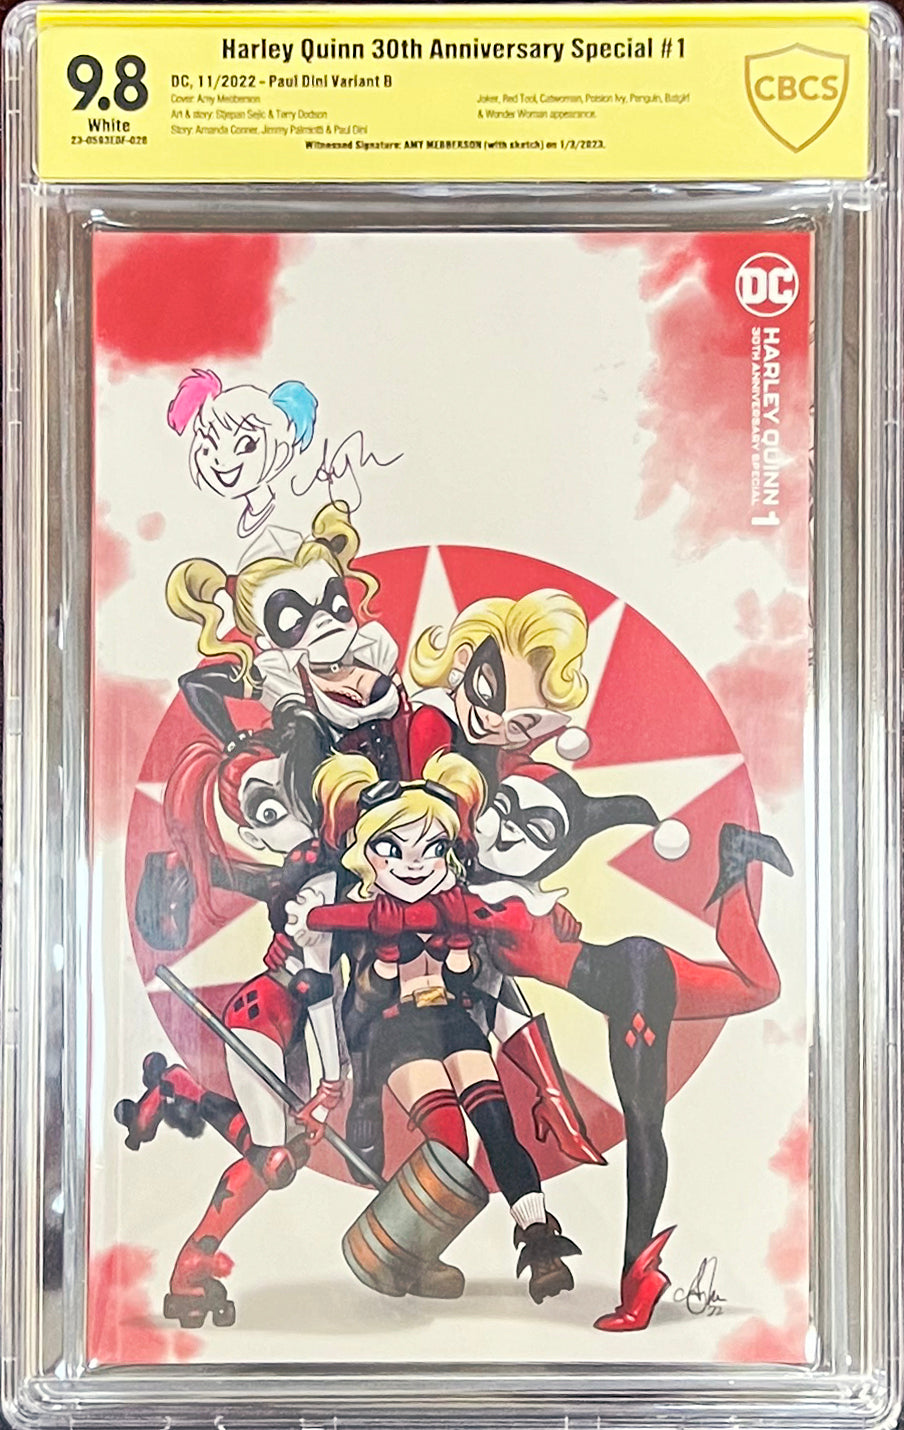 Harley Quinn 30th Anniversary Special #1 - Paul Dini Variant - CBCS 9.8, Multi-Signed